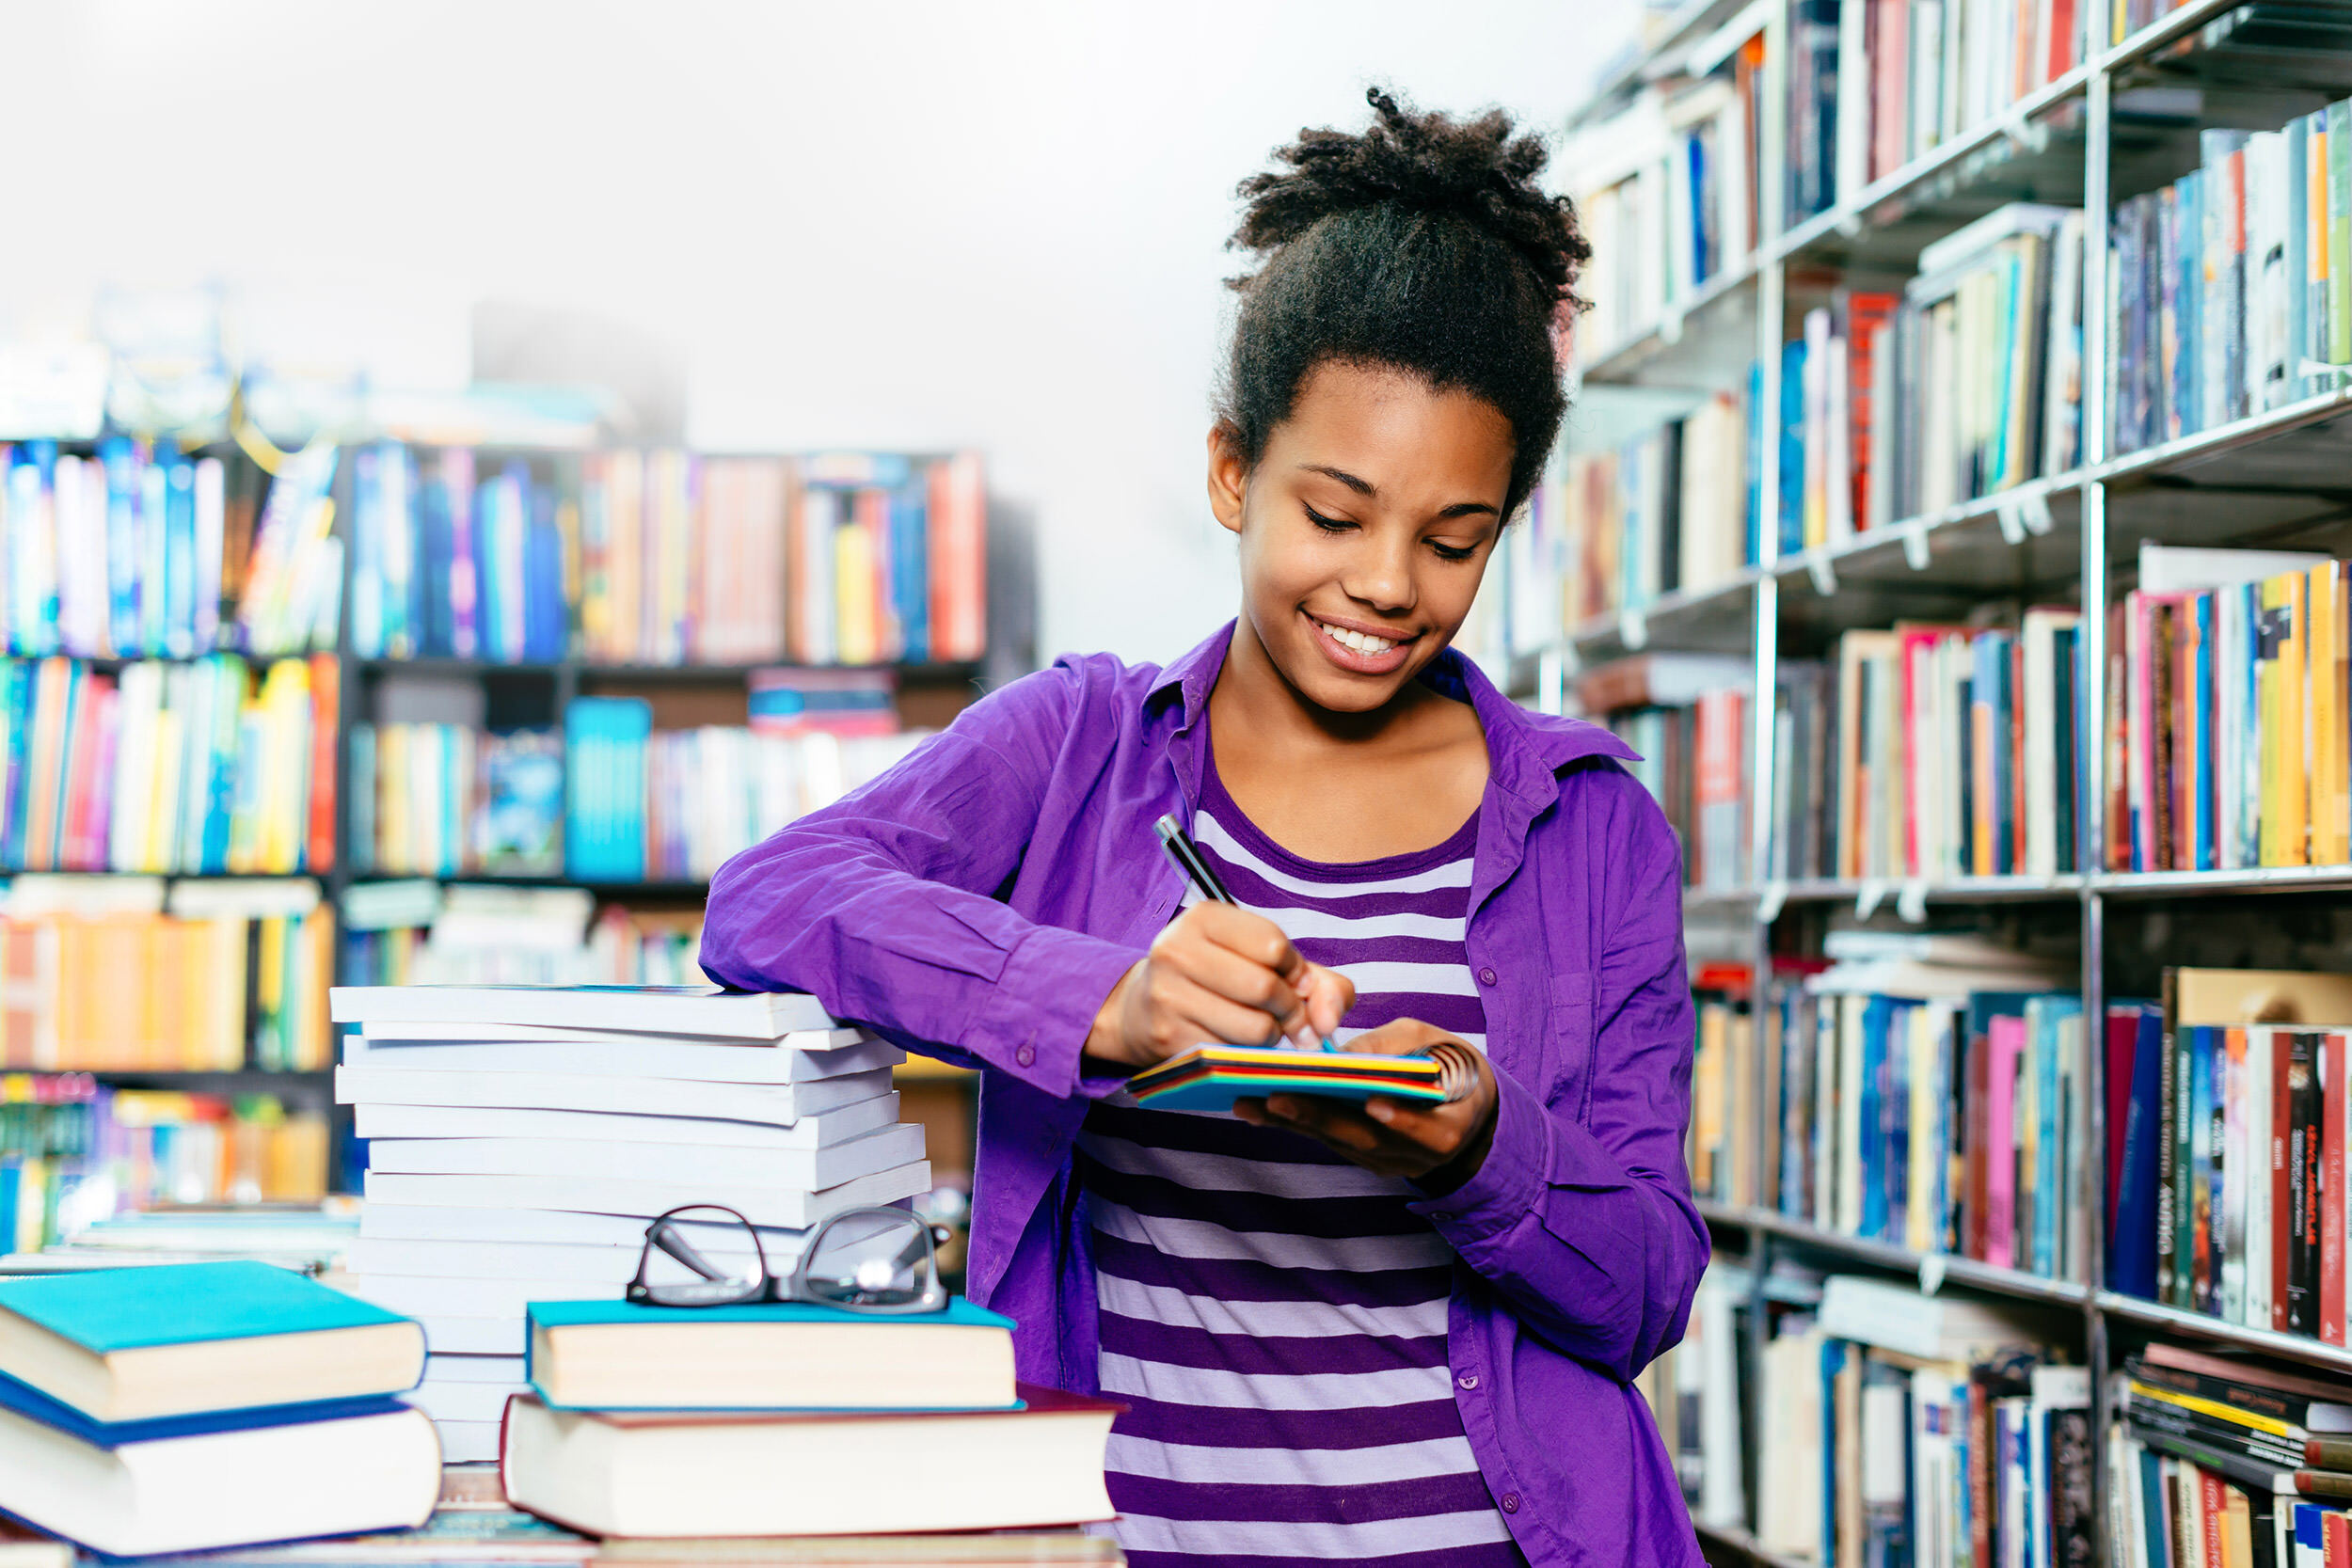 teen girl surrounded by books, writing in a notepad